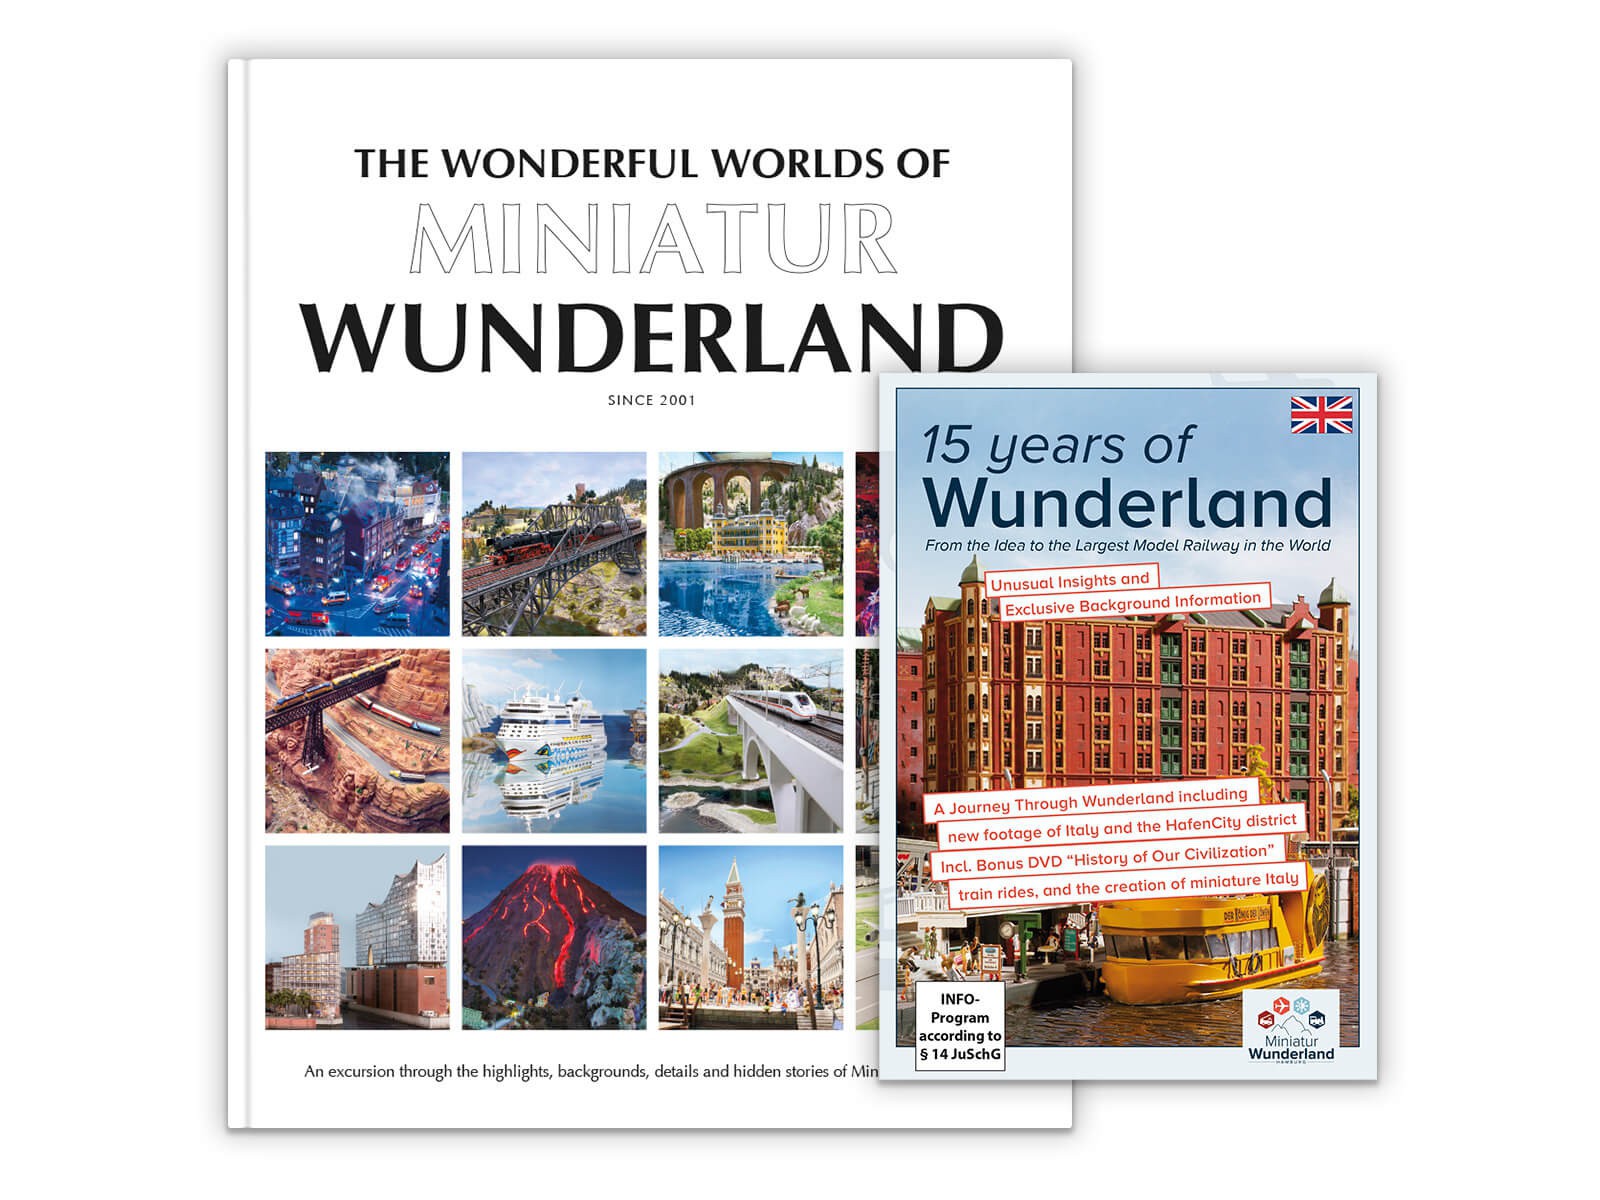 Combo Offer "The Wonderful Worlds of Miniatur Wunderland" Book & DVD "15 Years Wunderland"